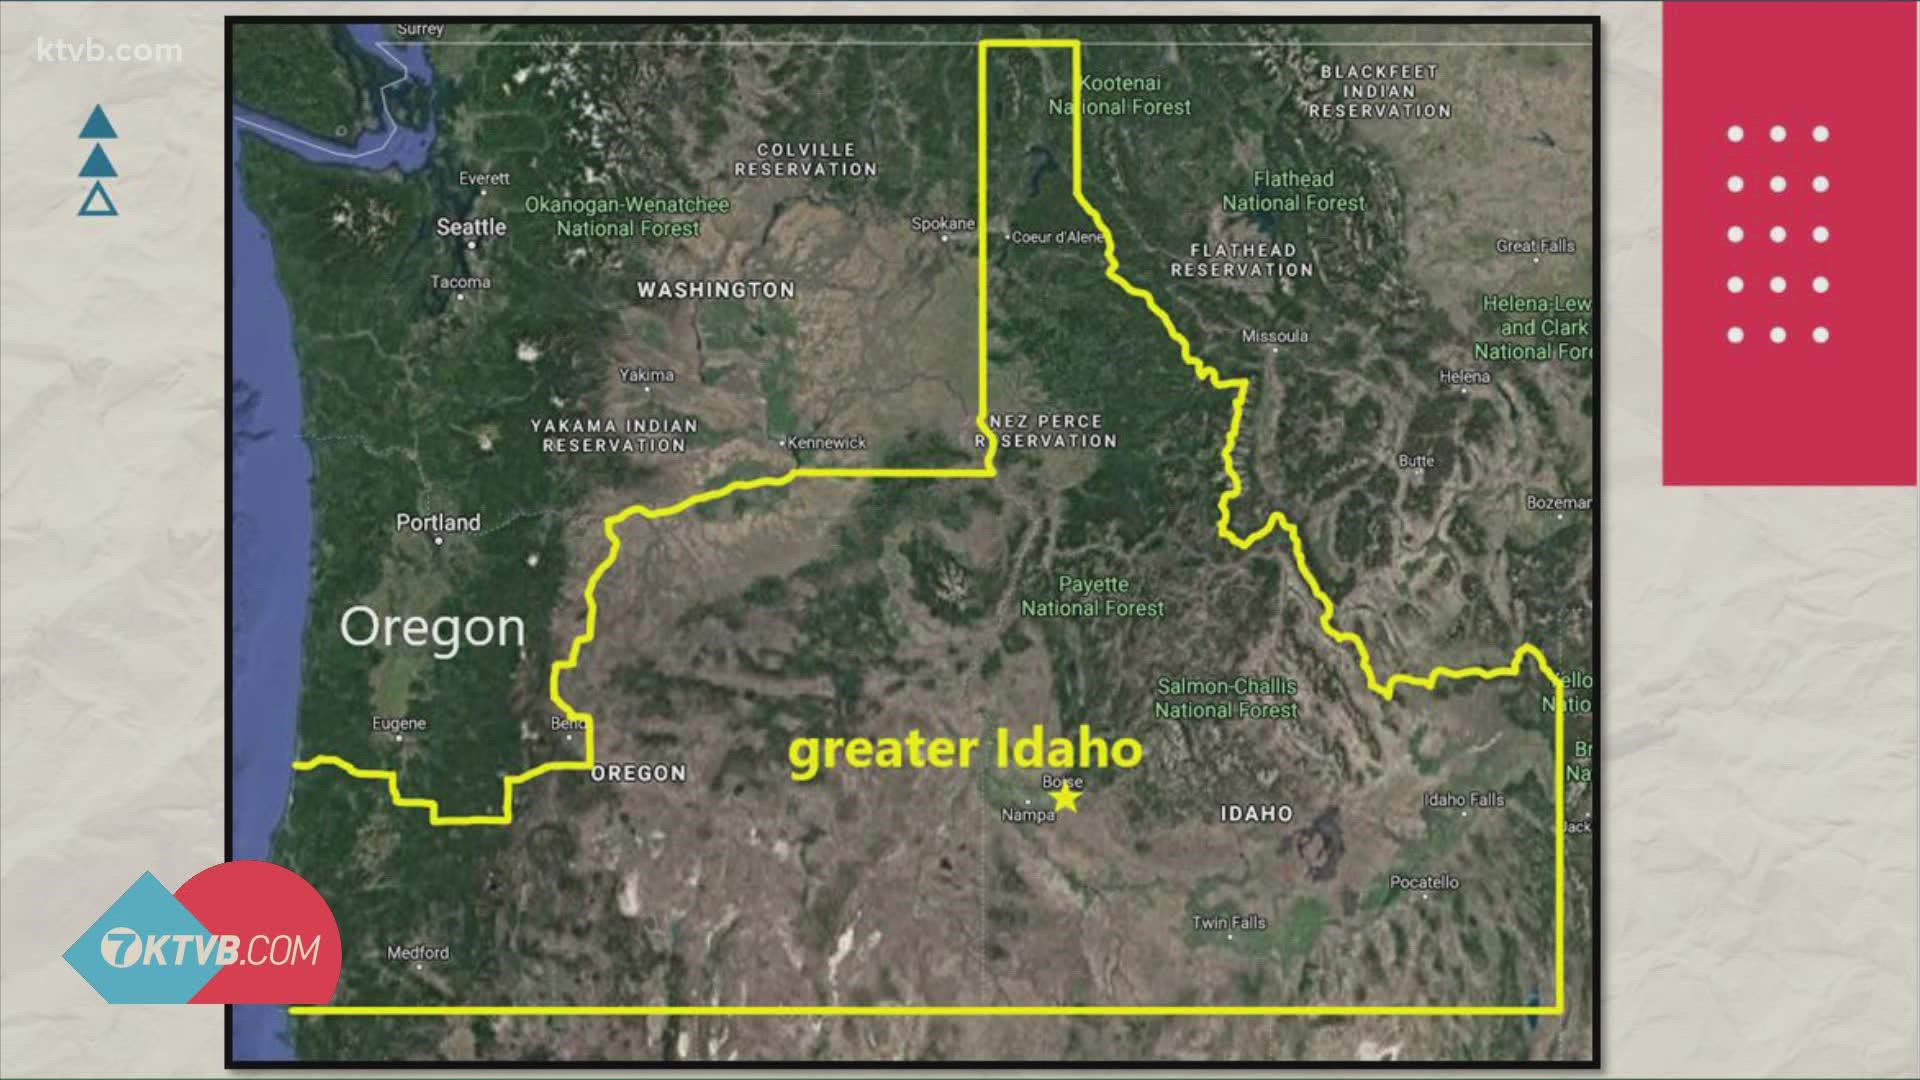 Voters in Harney County on Tuesday approved a ballot measure which requires local officials to hold meetings about moving the county into Idaho.